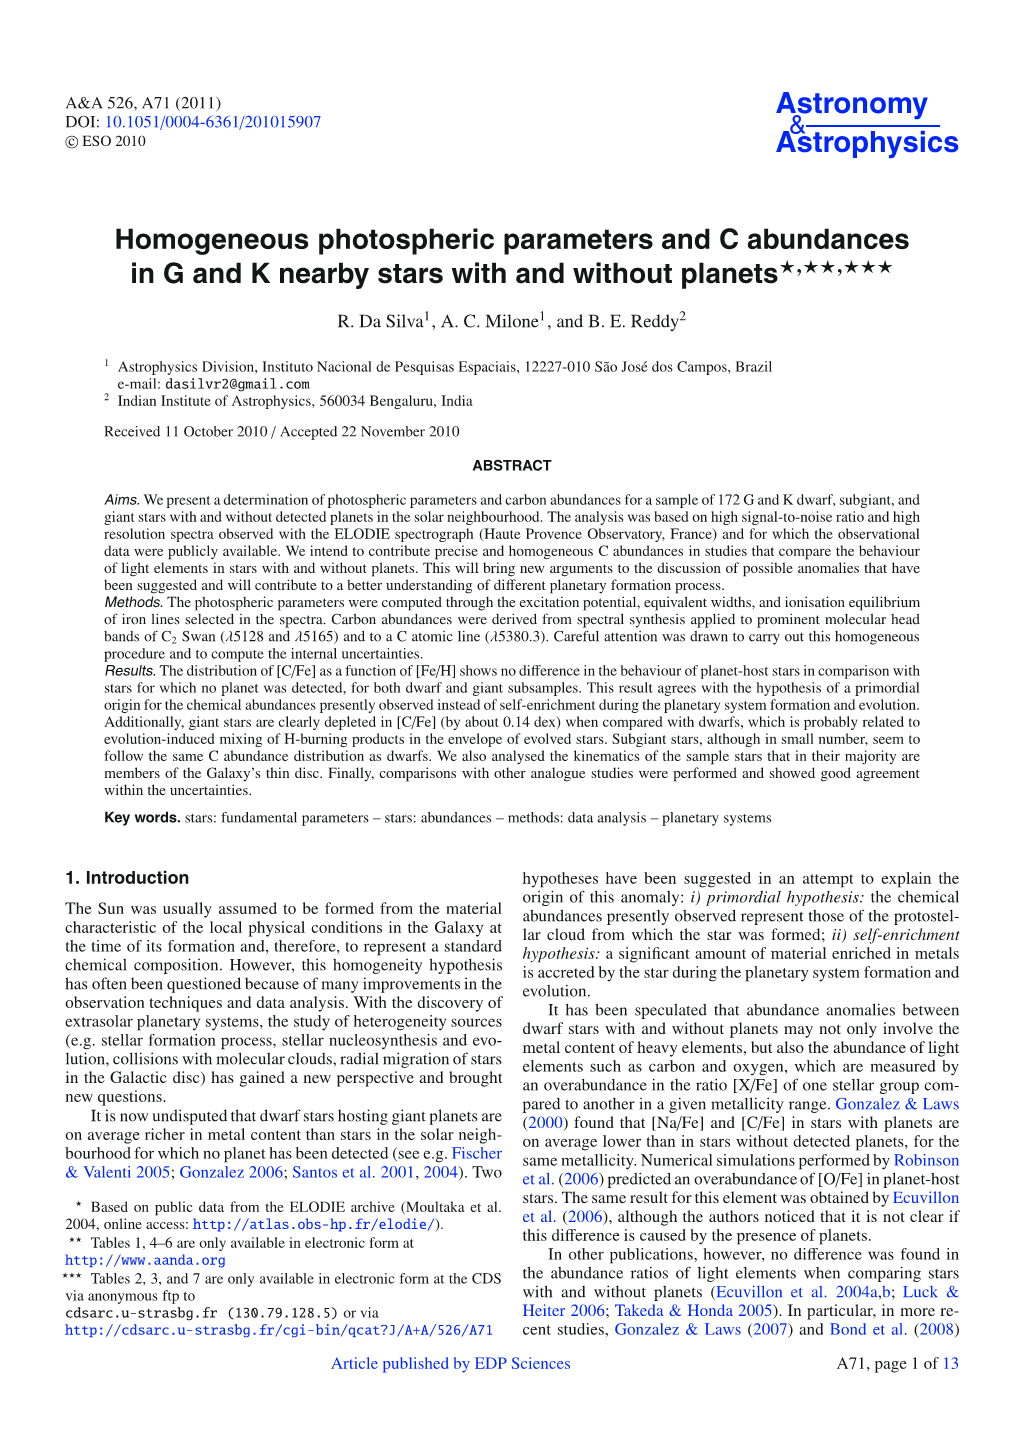 Homogeneous Photospheric Parameters and C Abundances in G and K Nearby Stars with and Without Planets�,��,�